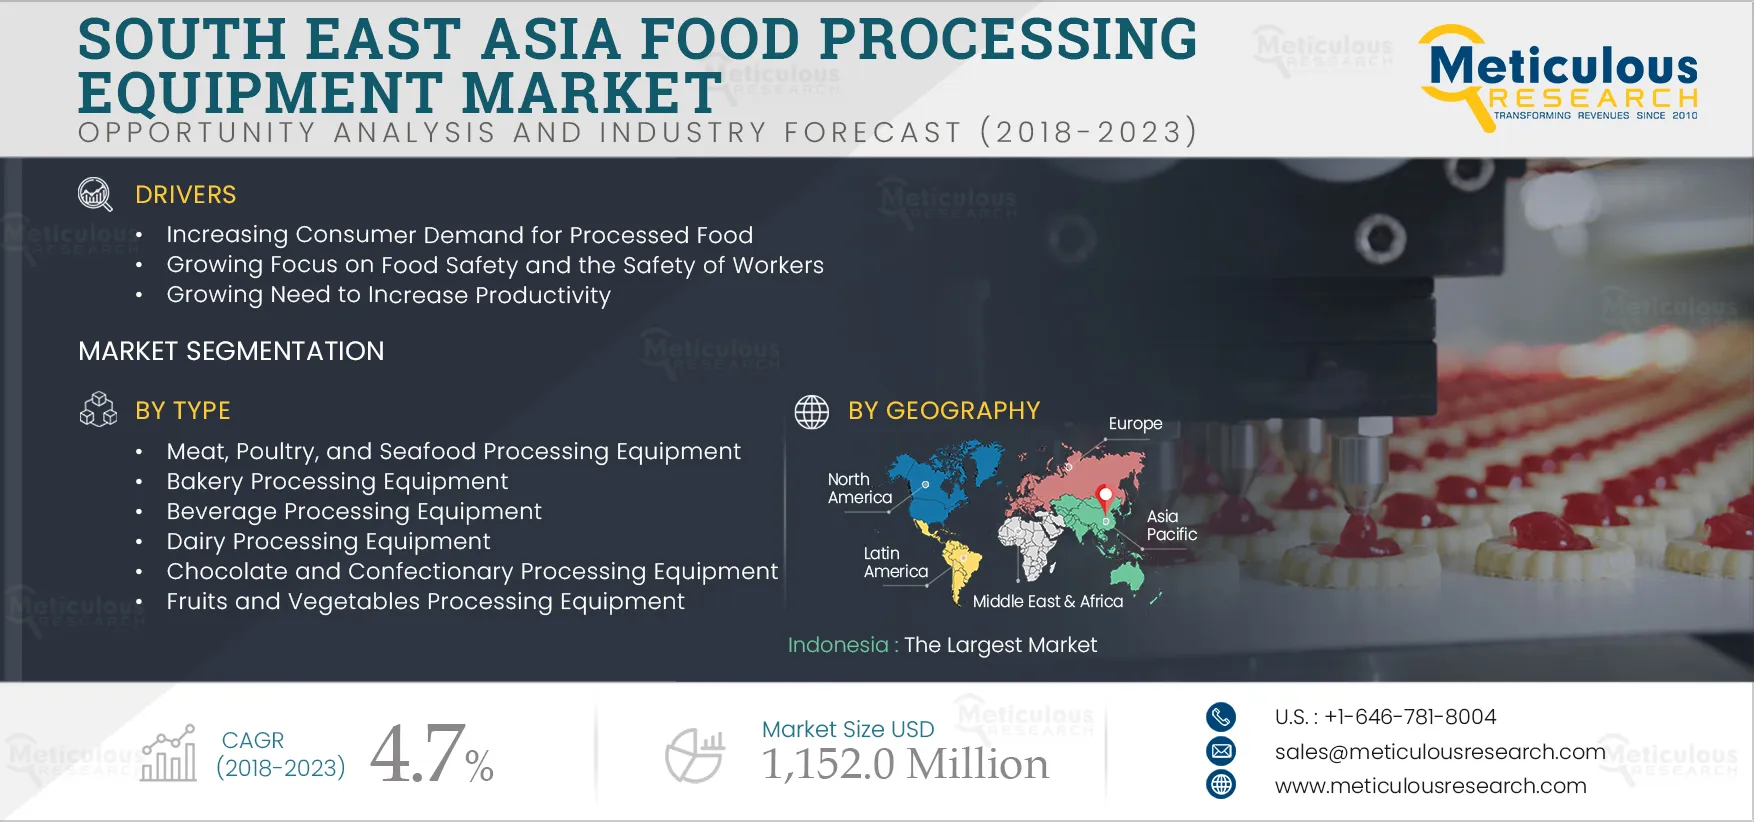 South East Asia Food Processing Equipment Market